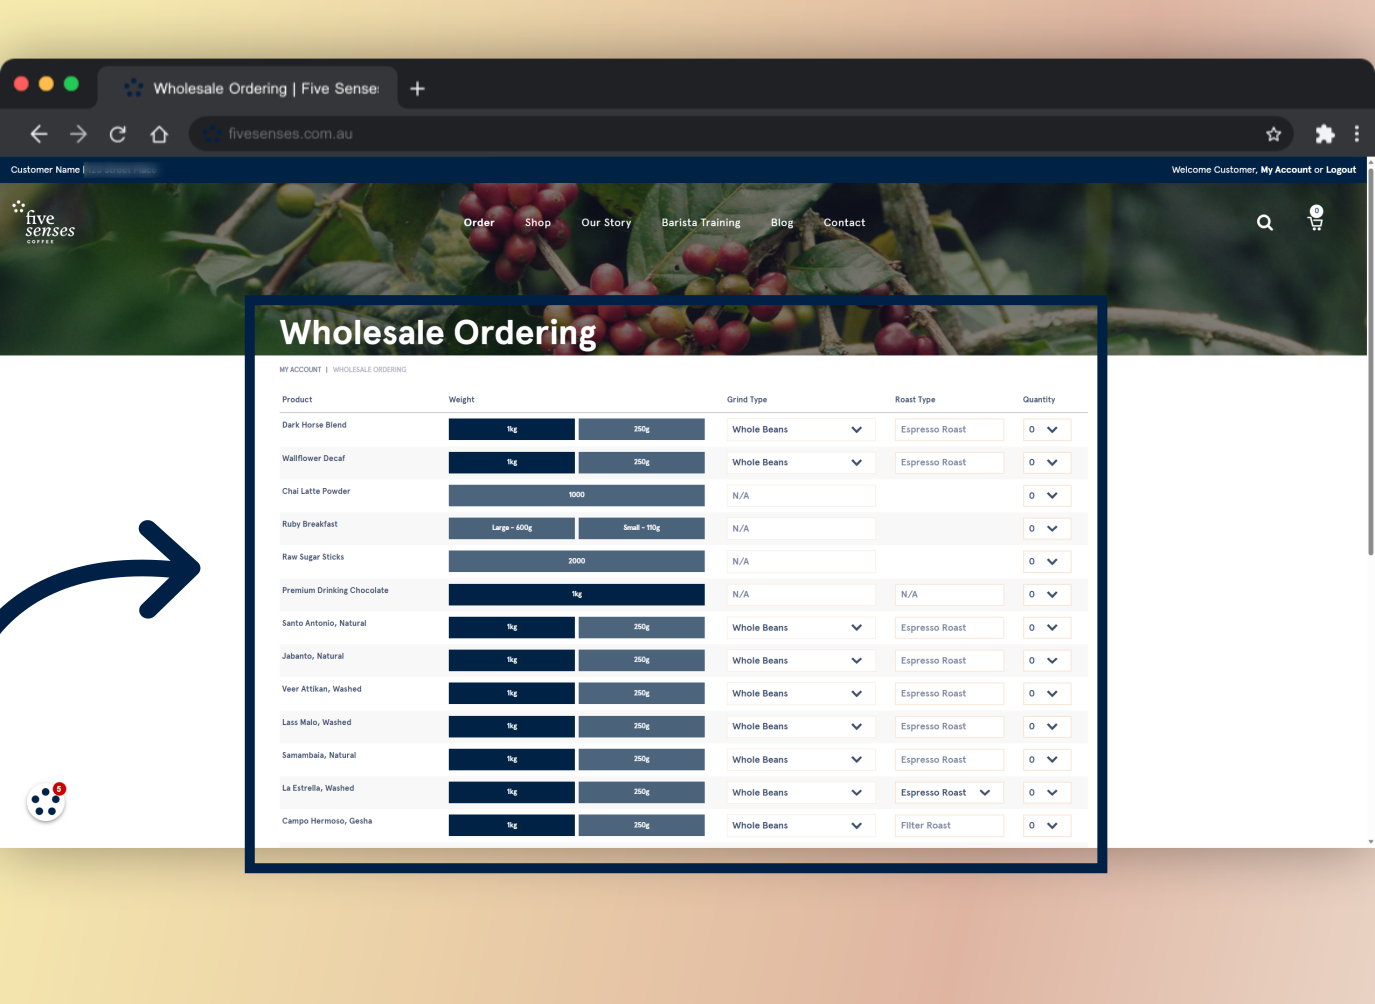 This is the Wholesale-only streamlined ordering form